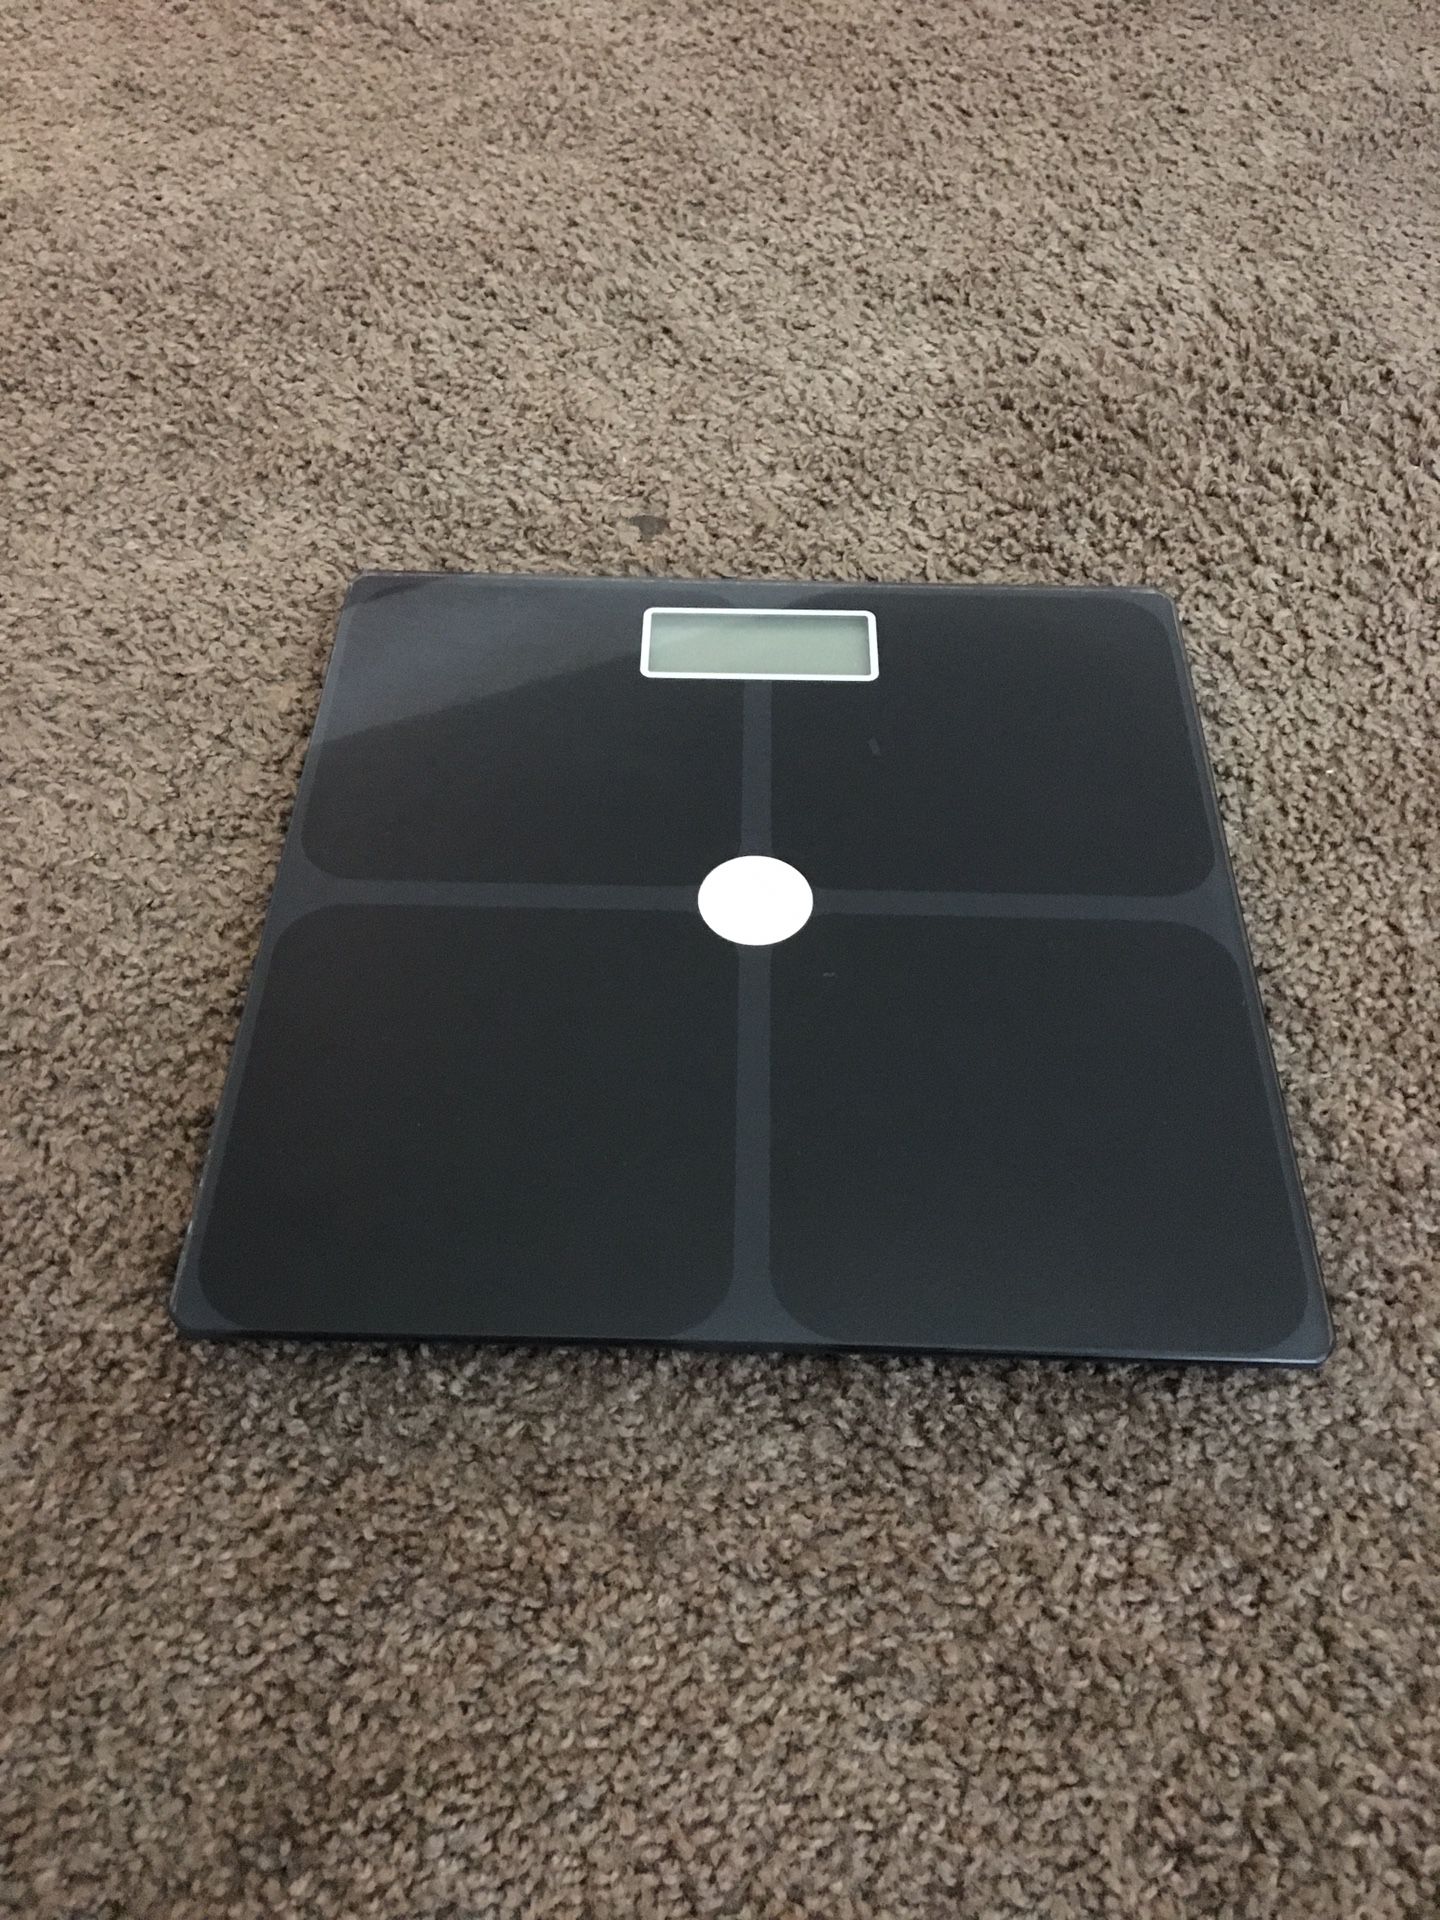 Accurate Bathroom Scale